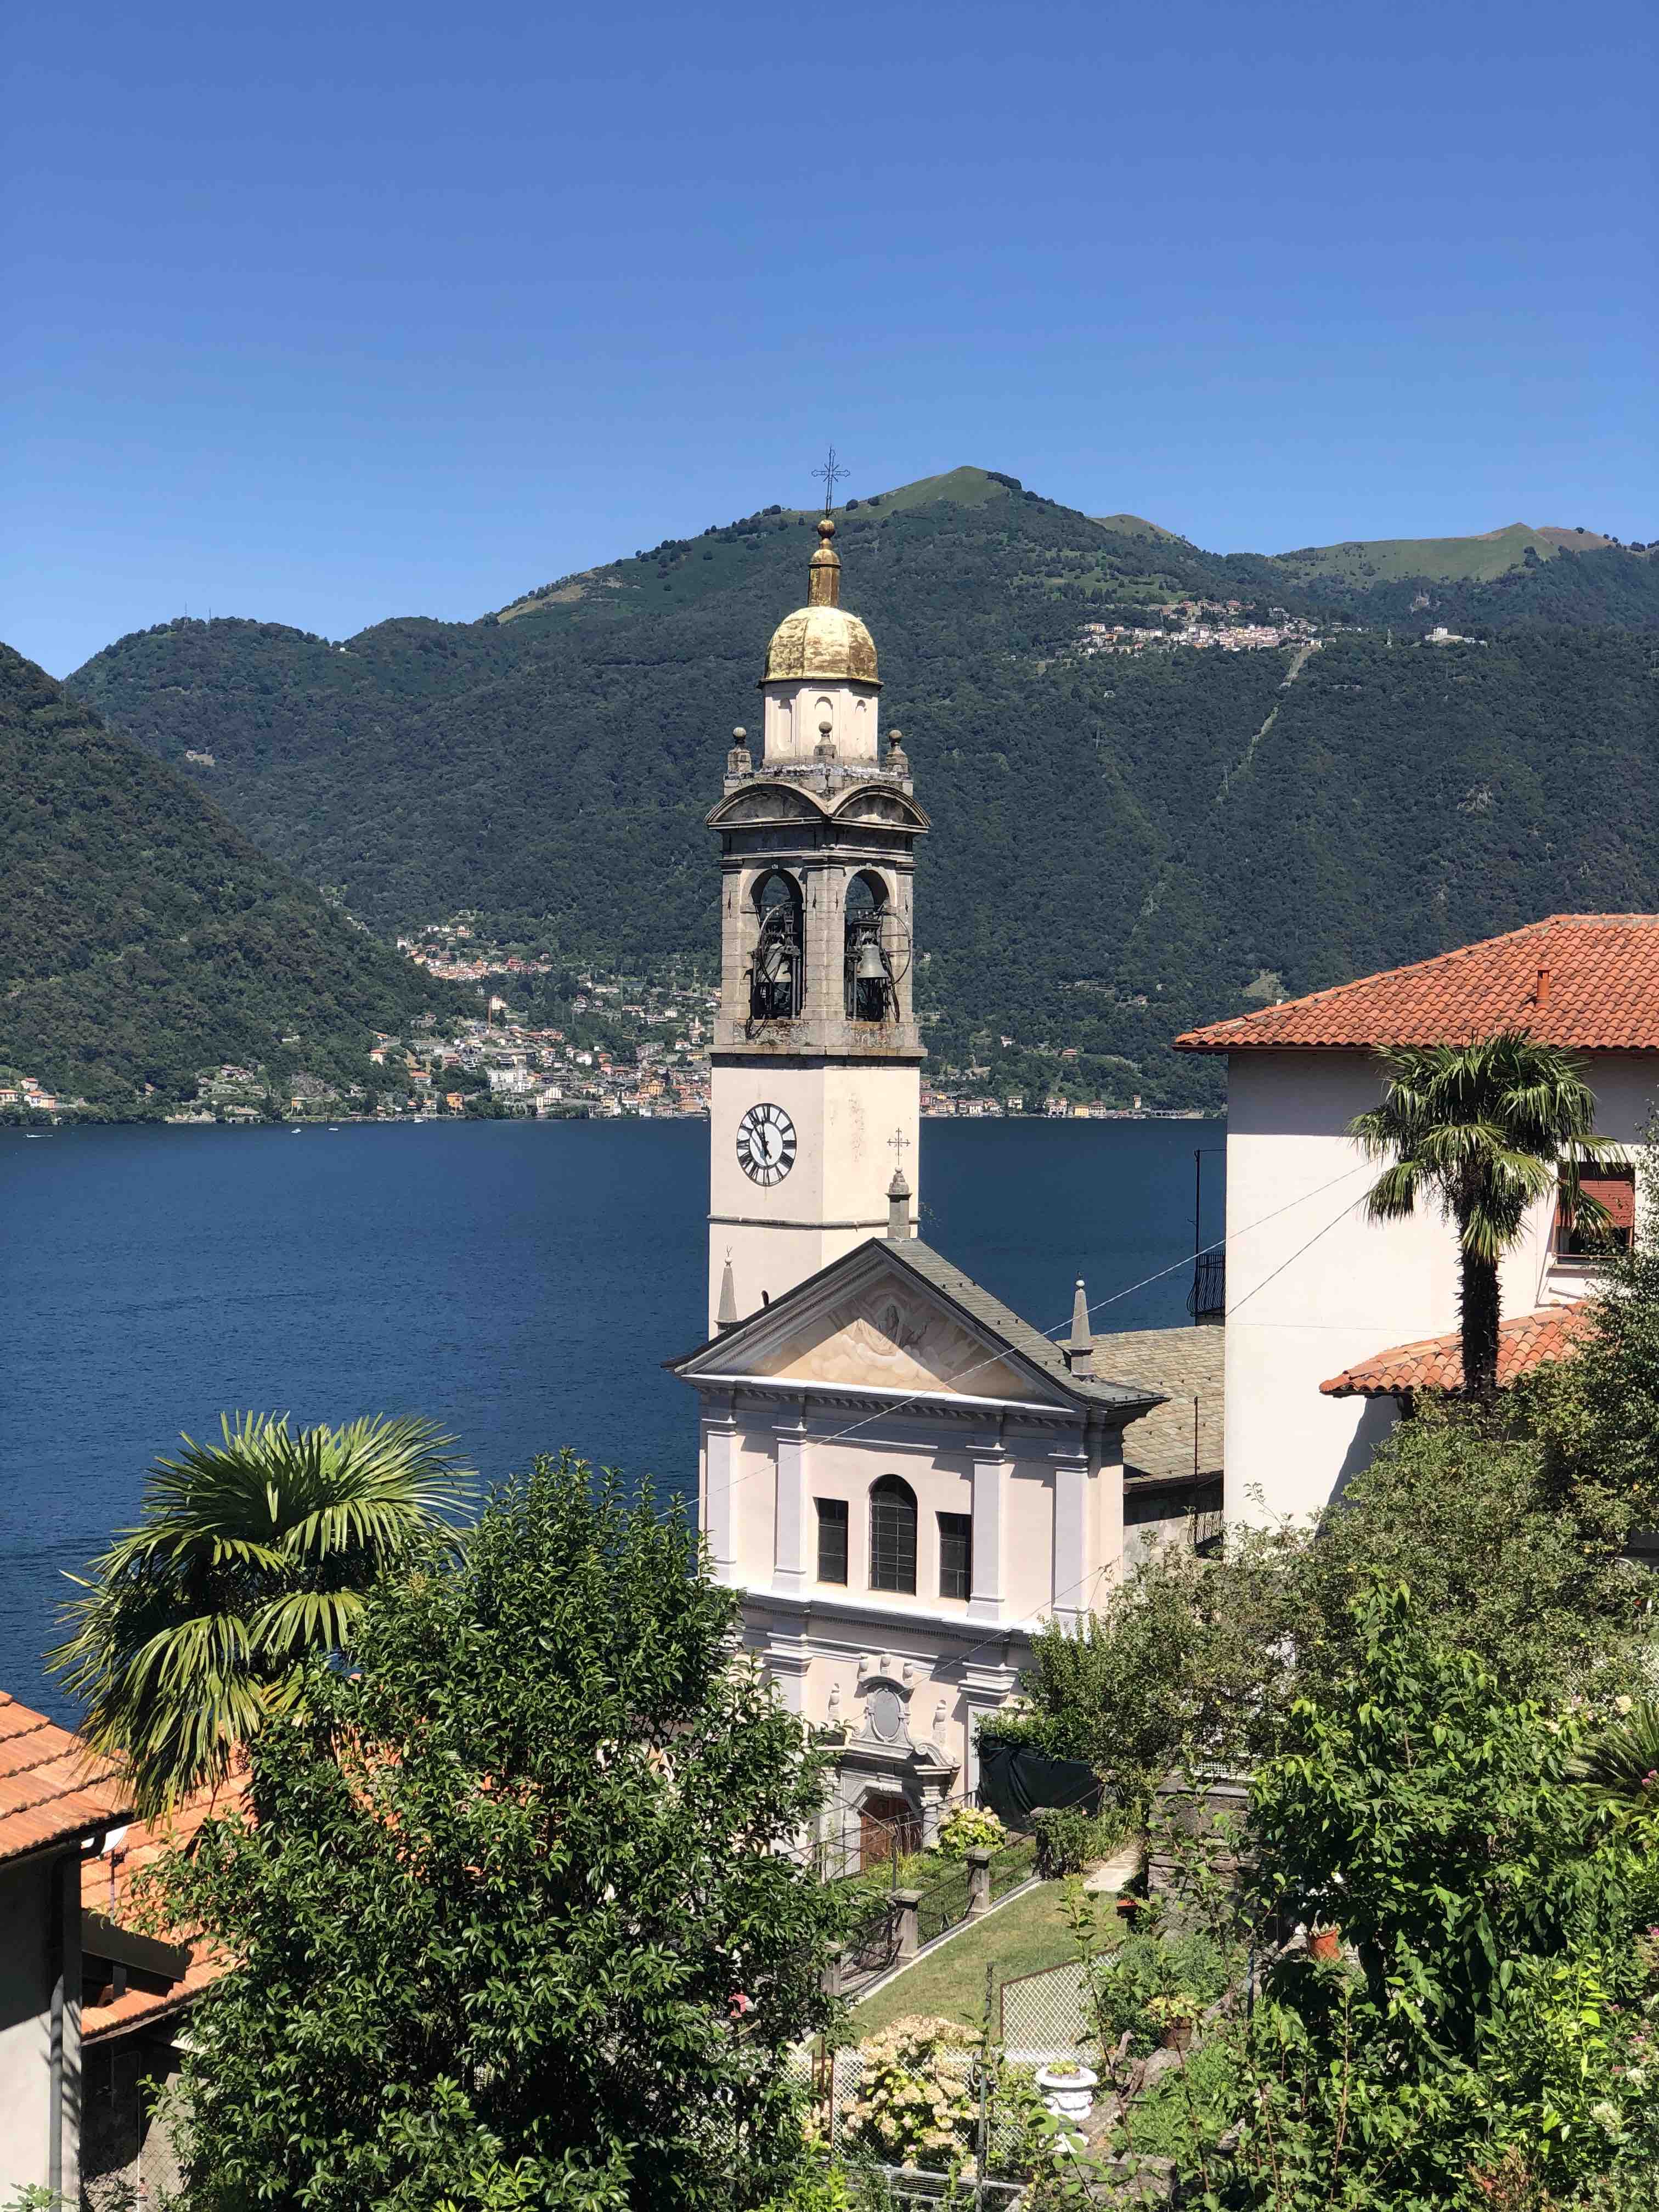 Bell tower on the coast of Lake Como in Italy